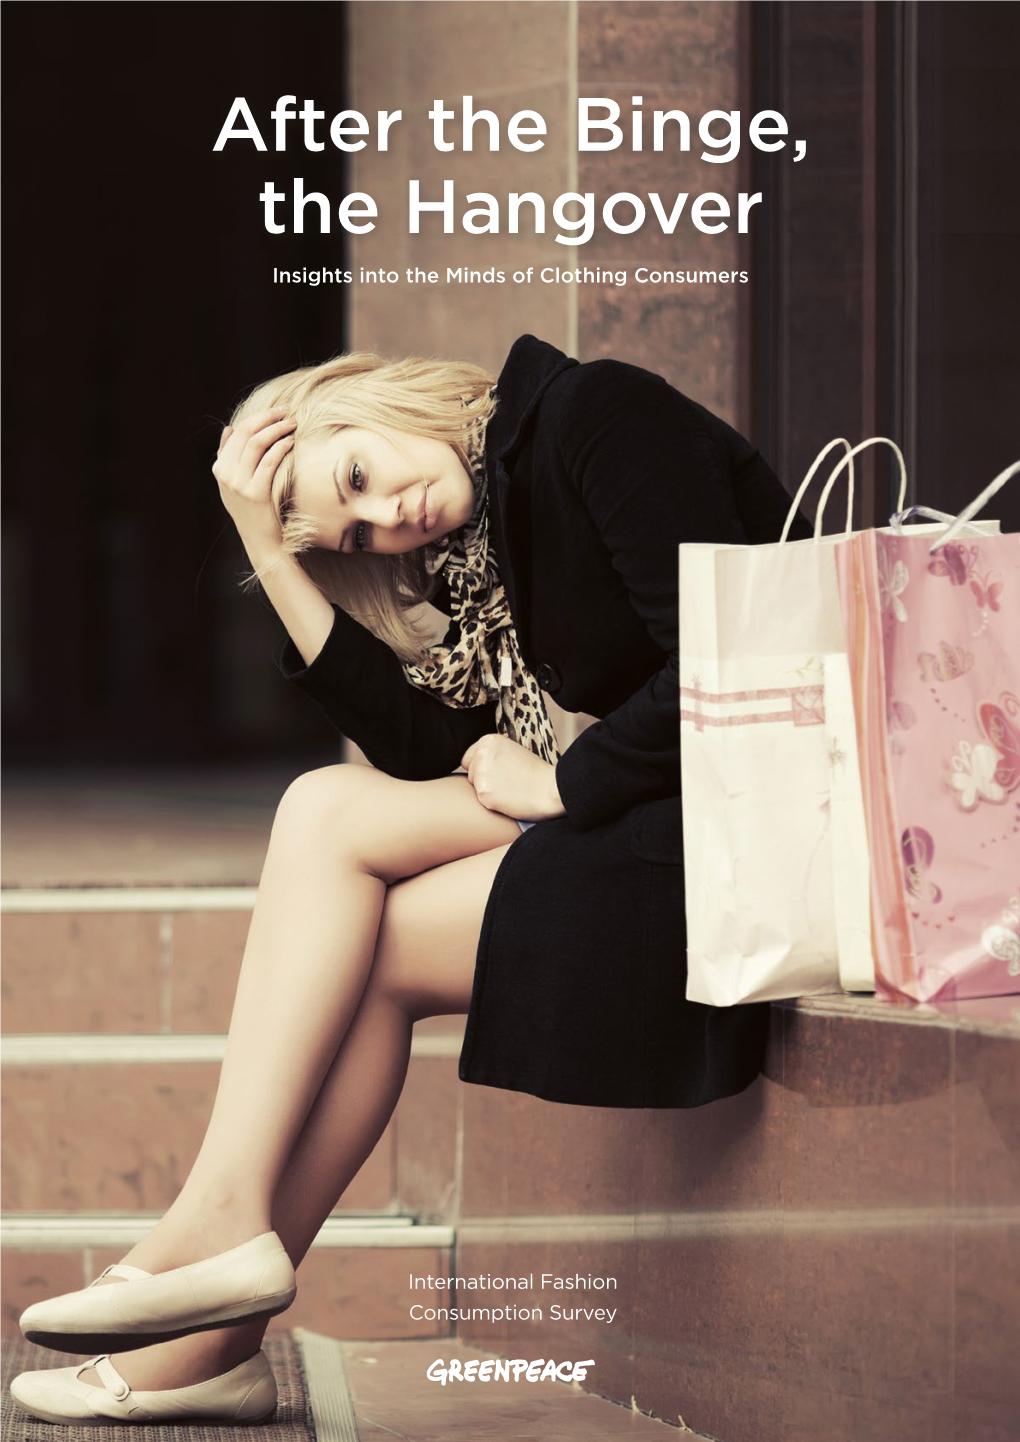 After the Binge, the Hangover Insights Into the Minds of Clothing Consumers